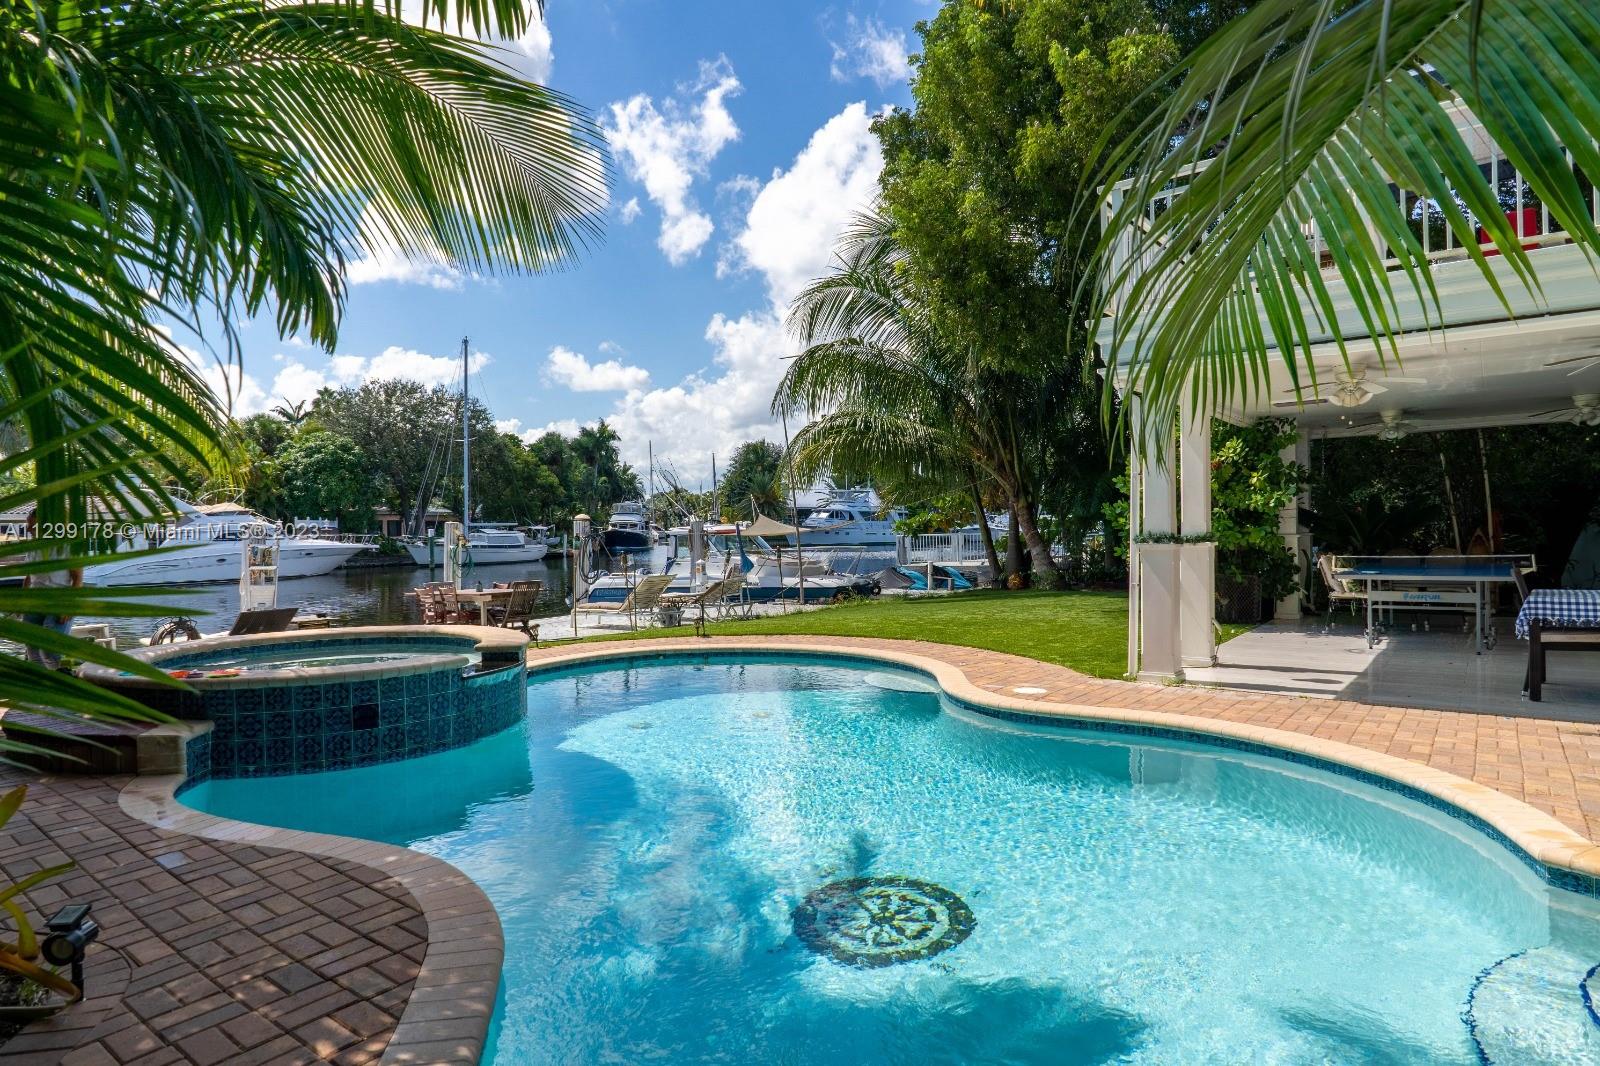 Amazing Intercoastal front 2 floor private home with 95 feet long deck with a pool and Jacuzzi. Ground floor has kitchen dinning area, 2 bedrooms , media room, office, 2.5 bathrooms , gym. First floor has kitchenette, living room , a large terrace, tv room with sofa bed, 4 bedrooms and 4 bathrooms.